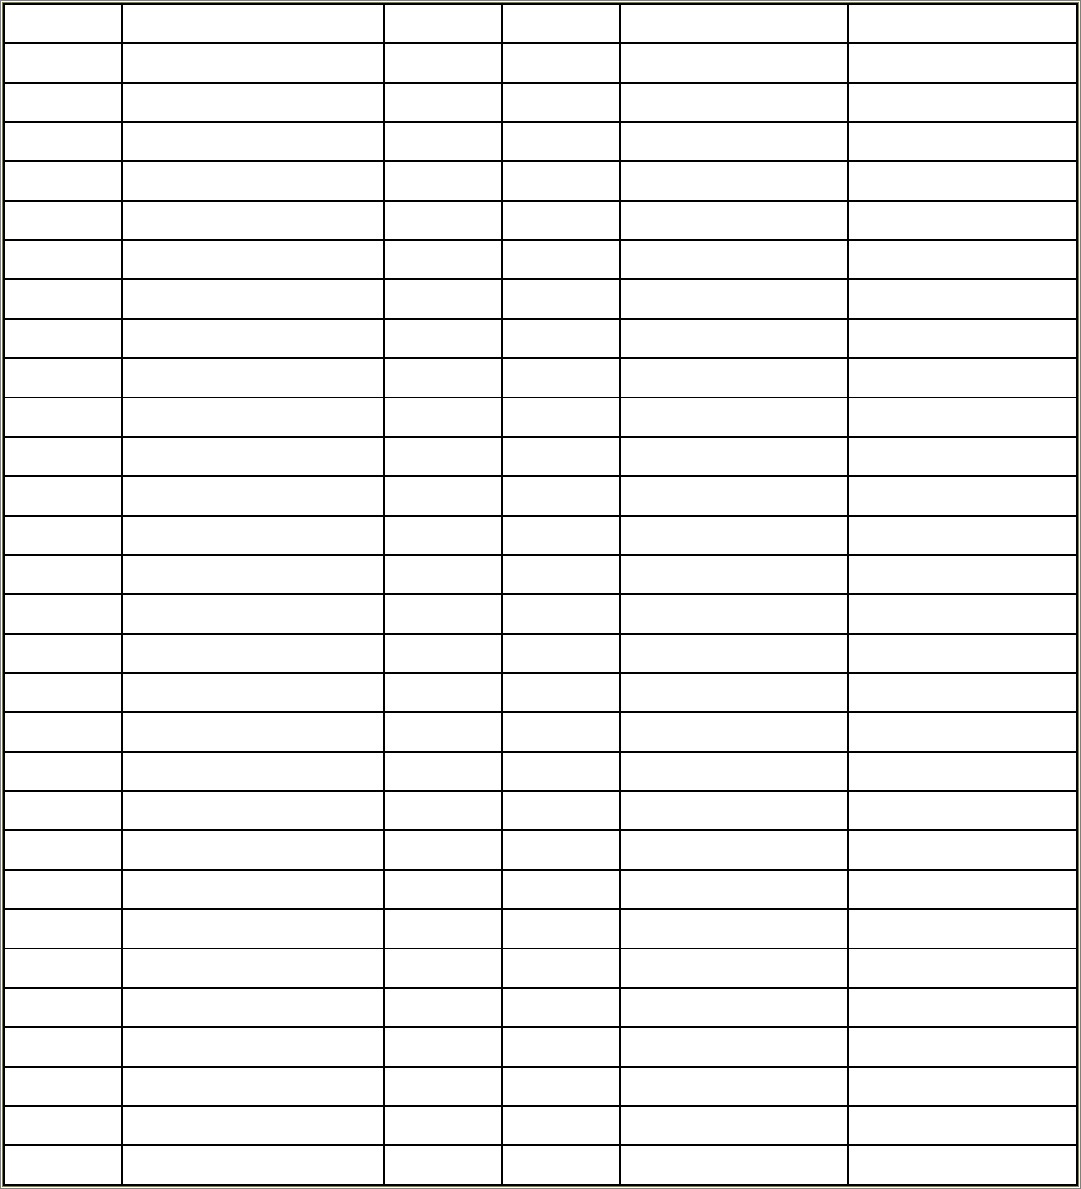 Free Templates For Sign In And Out Sheets